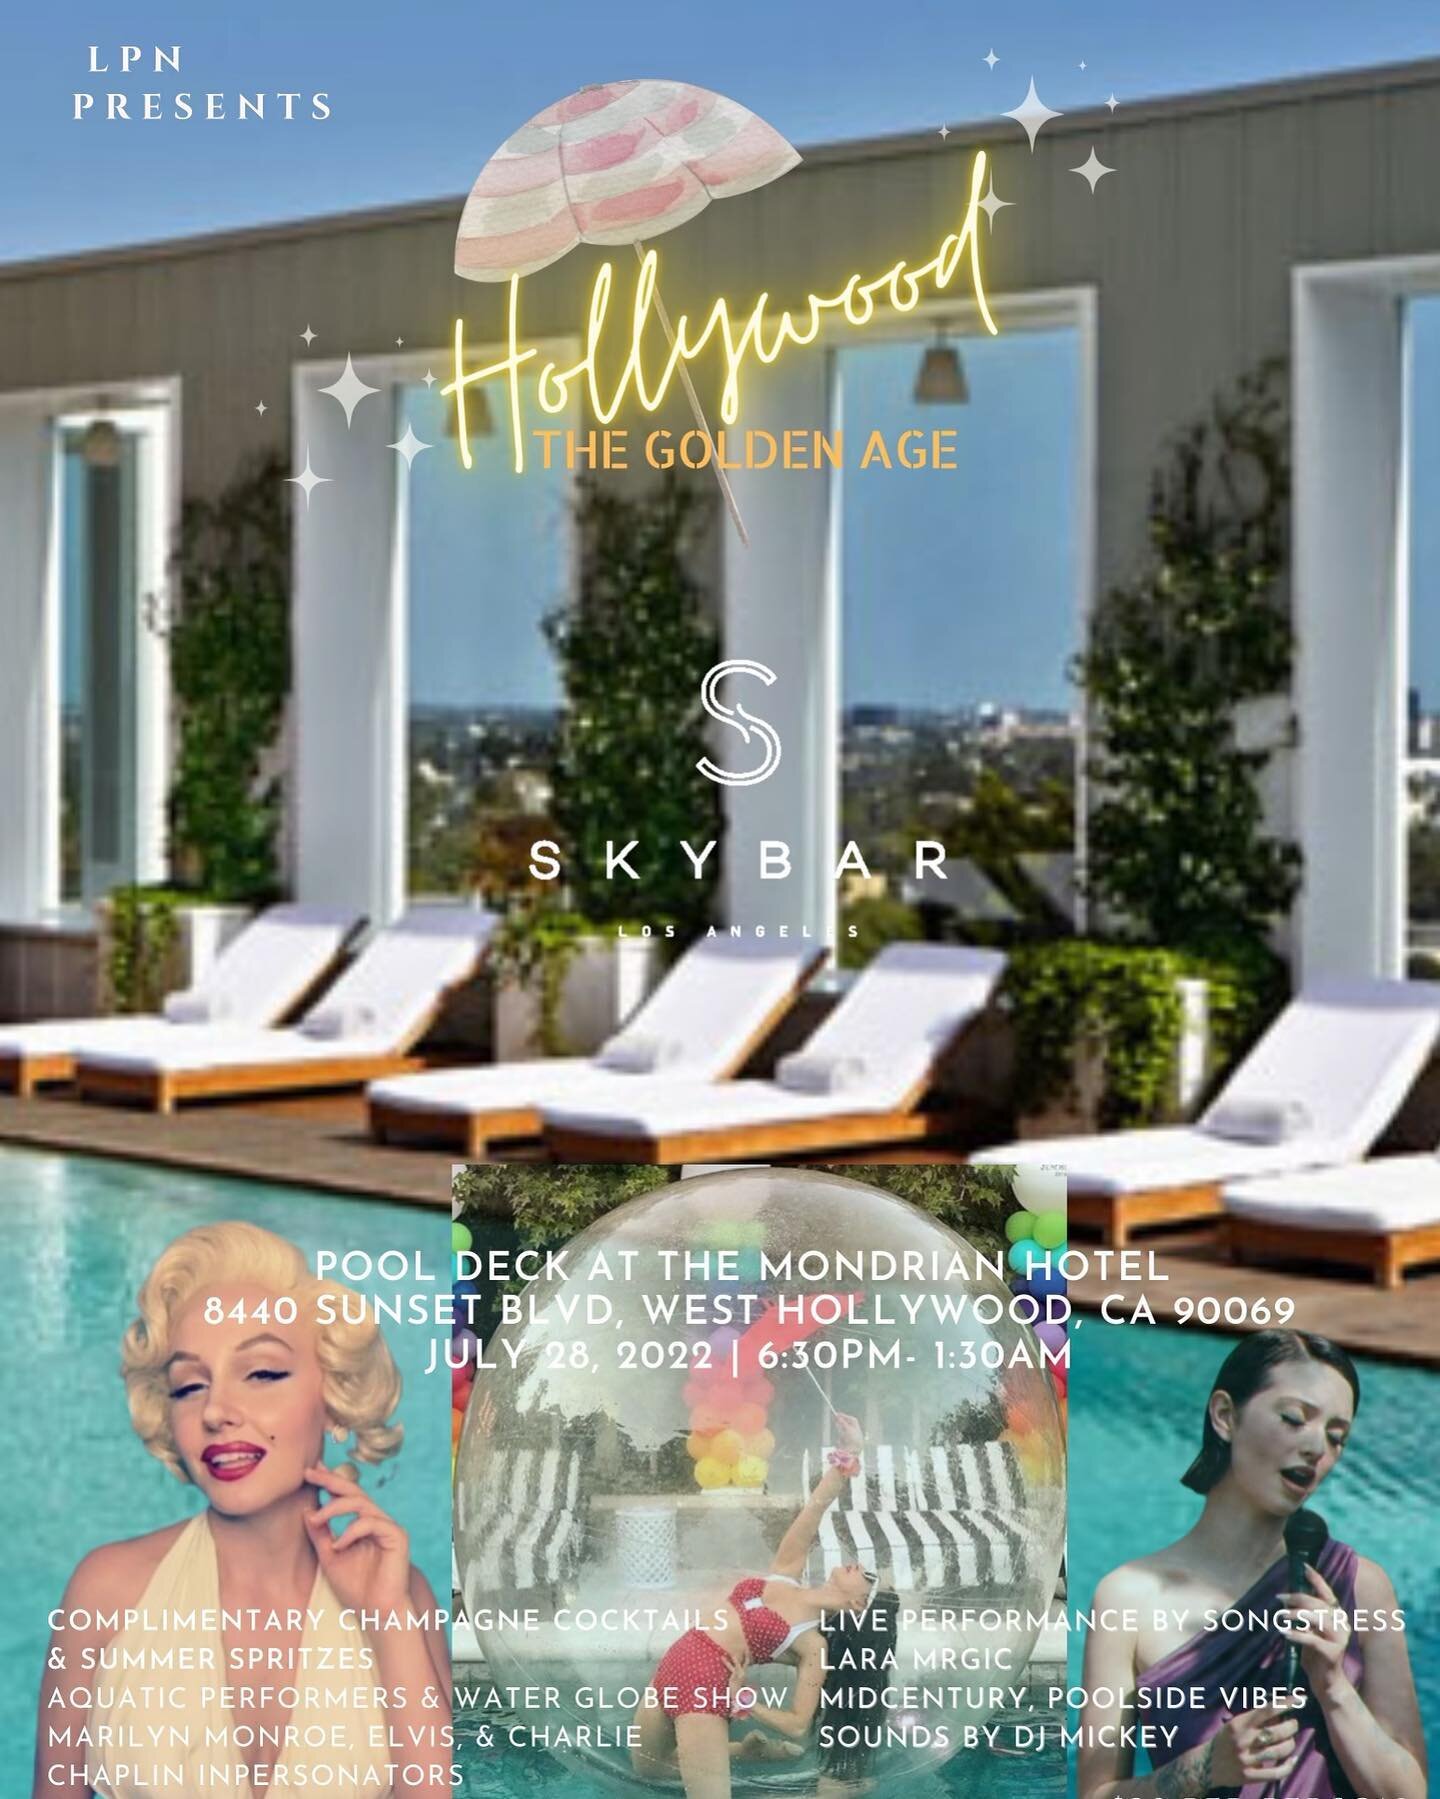 LPN's Summer Soiree,&quot;Hollywood- The Golden Age&quot; is this Thursday at the Skybar Pool Deck of the Mondrian Hotel. Thursday July 28, 2022, 6:30pm-1:30am. Travel back in time to 1950s Hollywood while networking Poolside with hundreds of profess